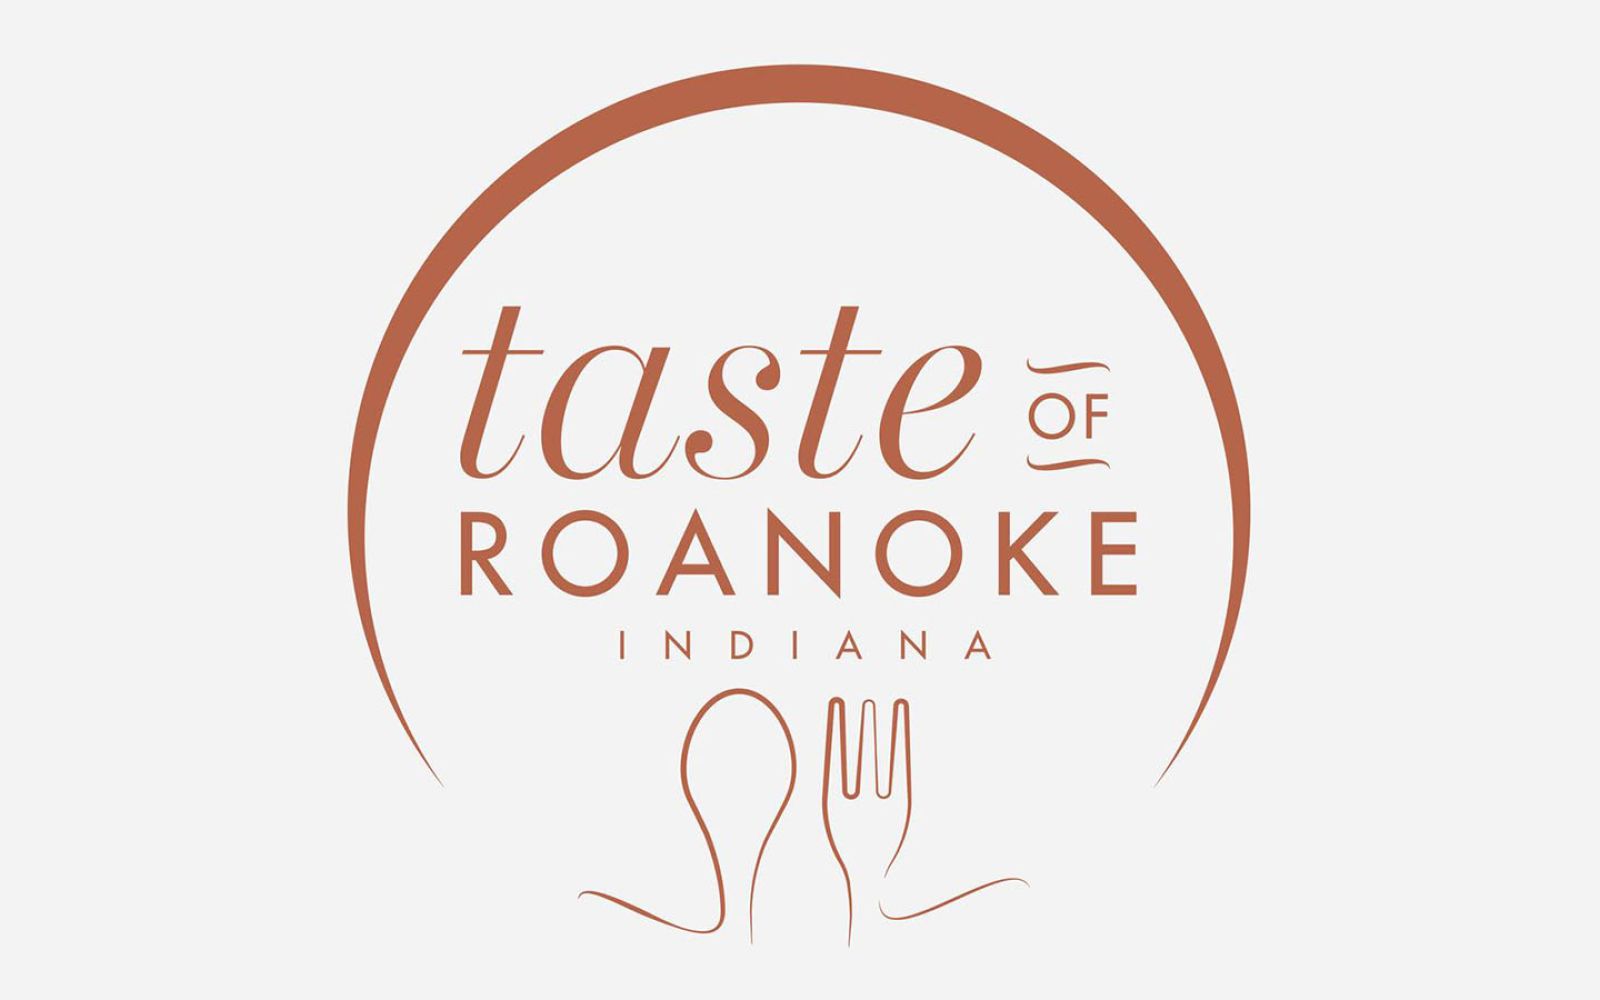 Restaurants will have special deals during Taste of Roanoke, which begins March 1.